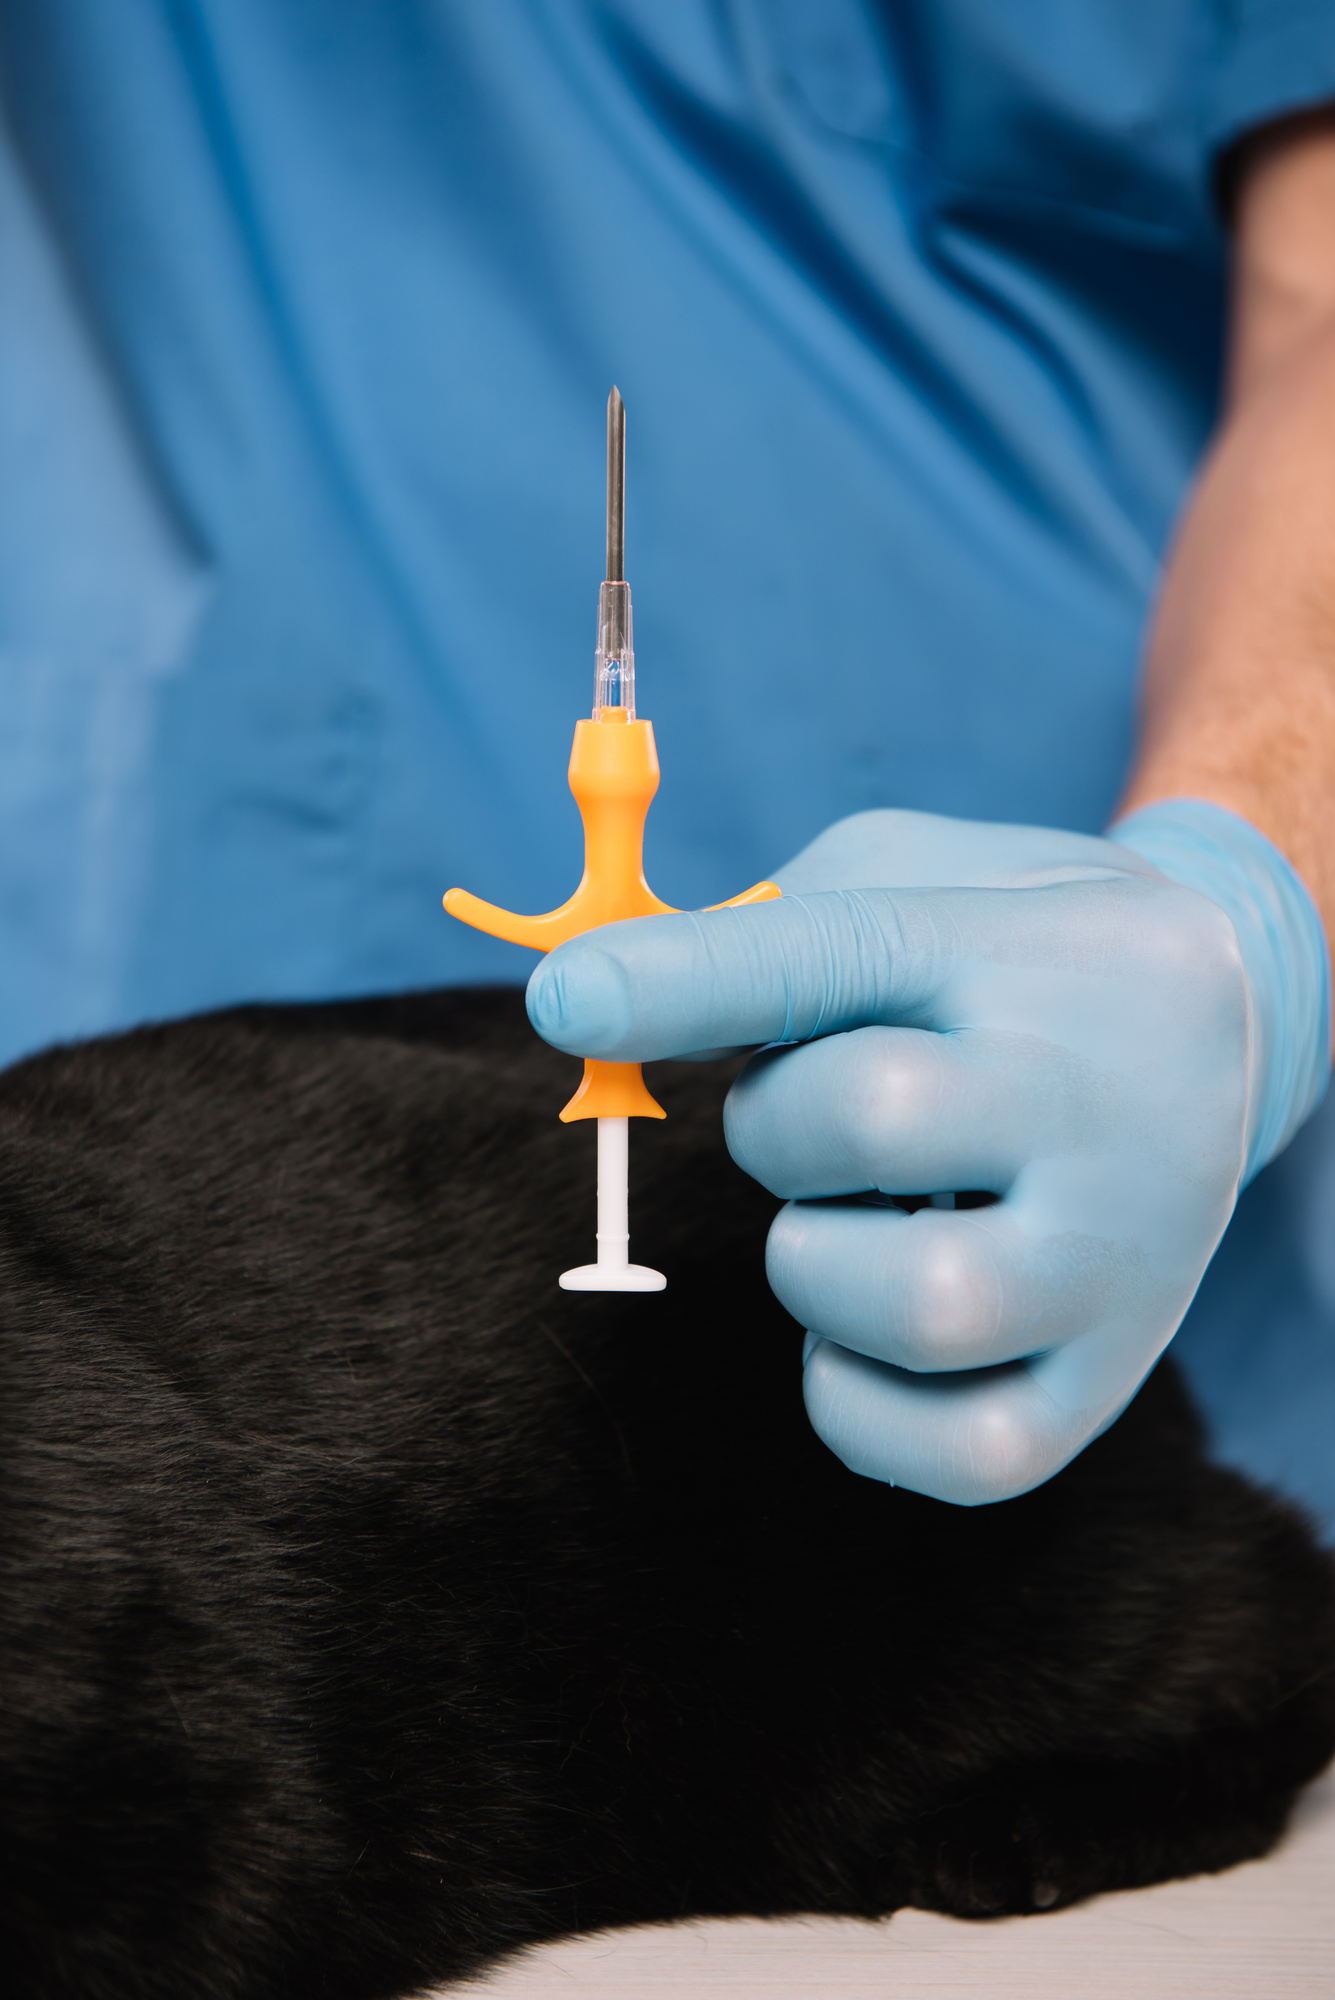 Holding up a microchip syringe